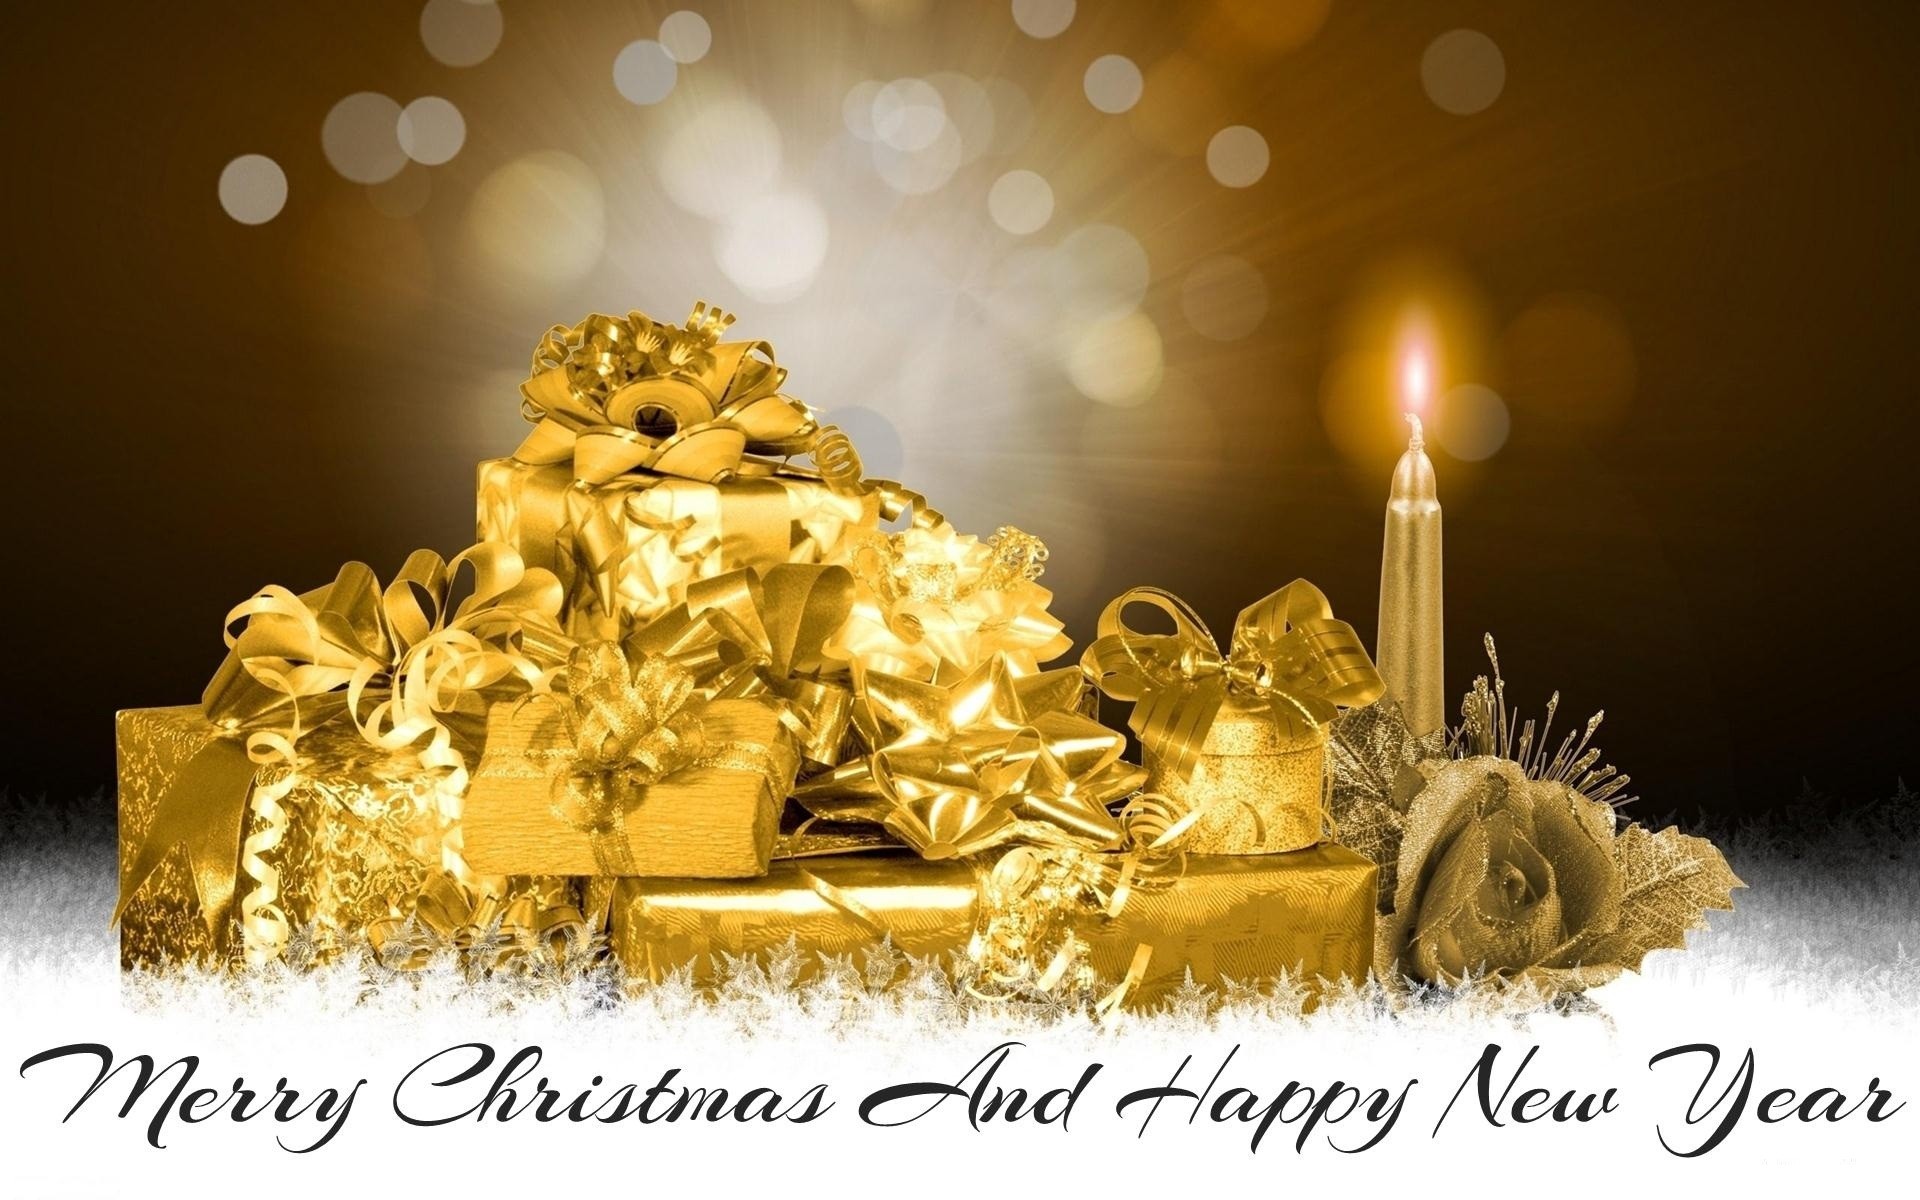 1920x1200 Merry Christmas and Happy New Year Wallpaper for PC.